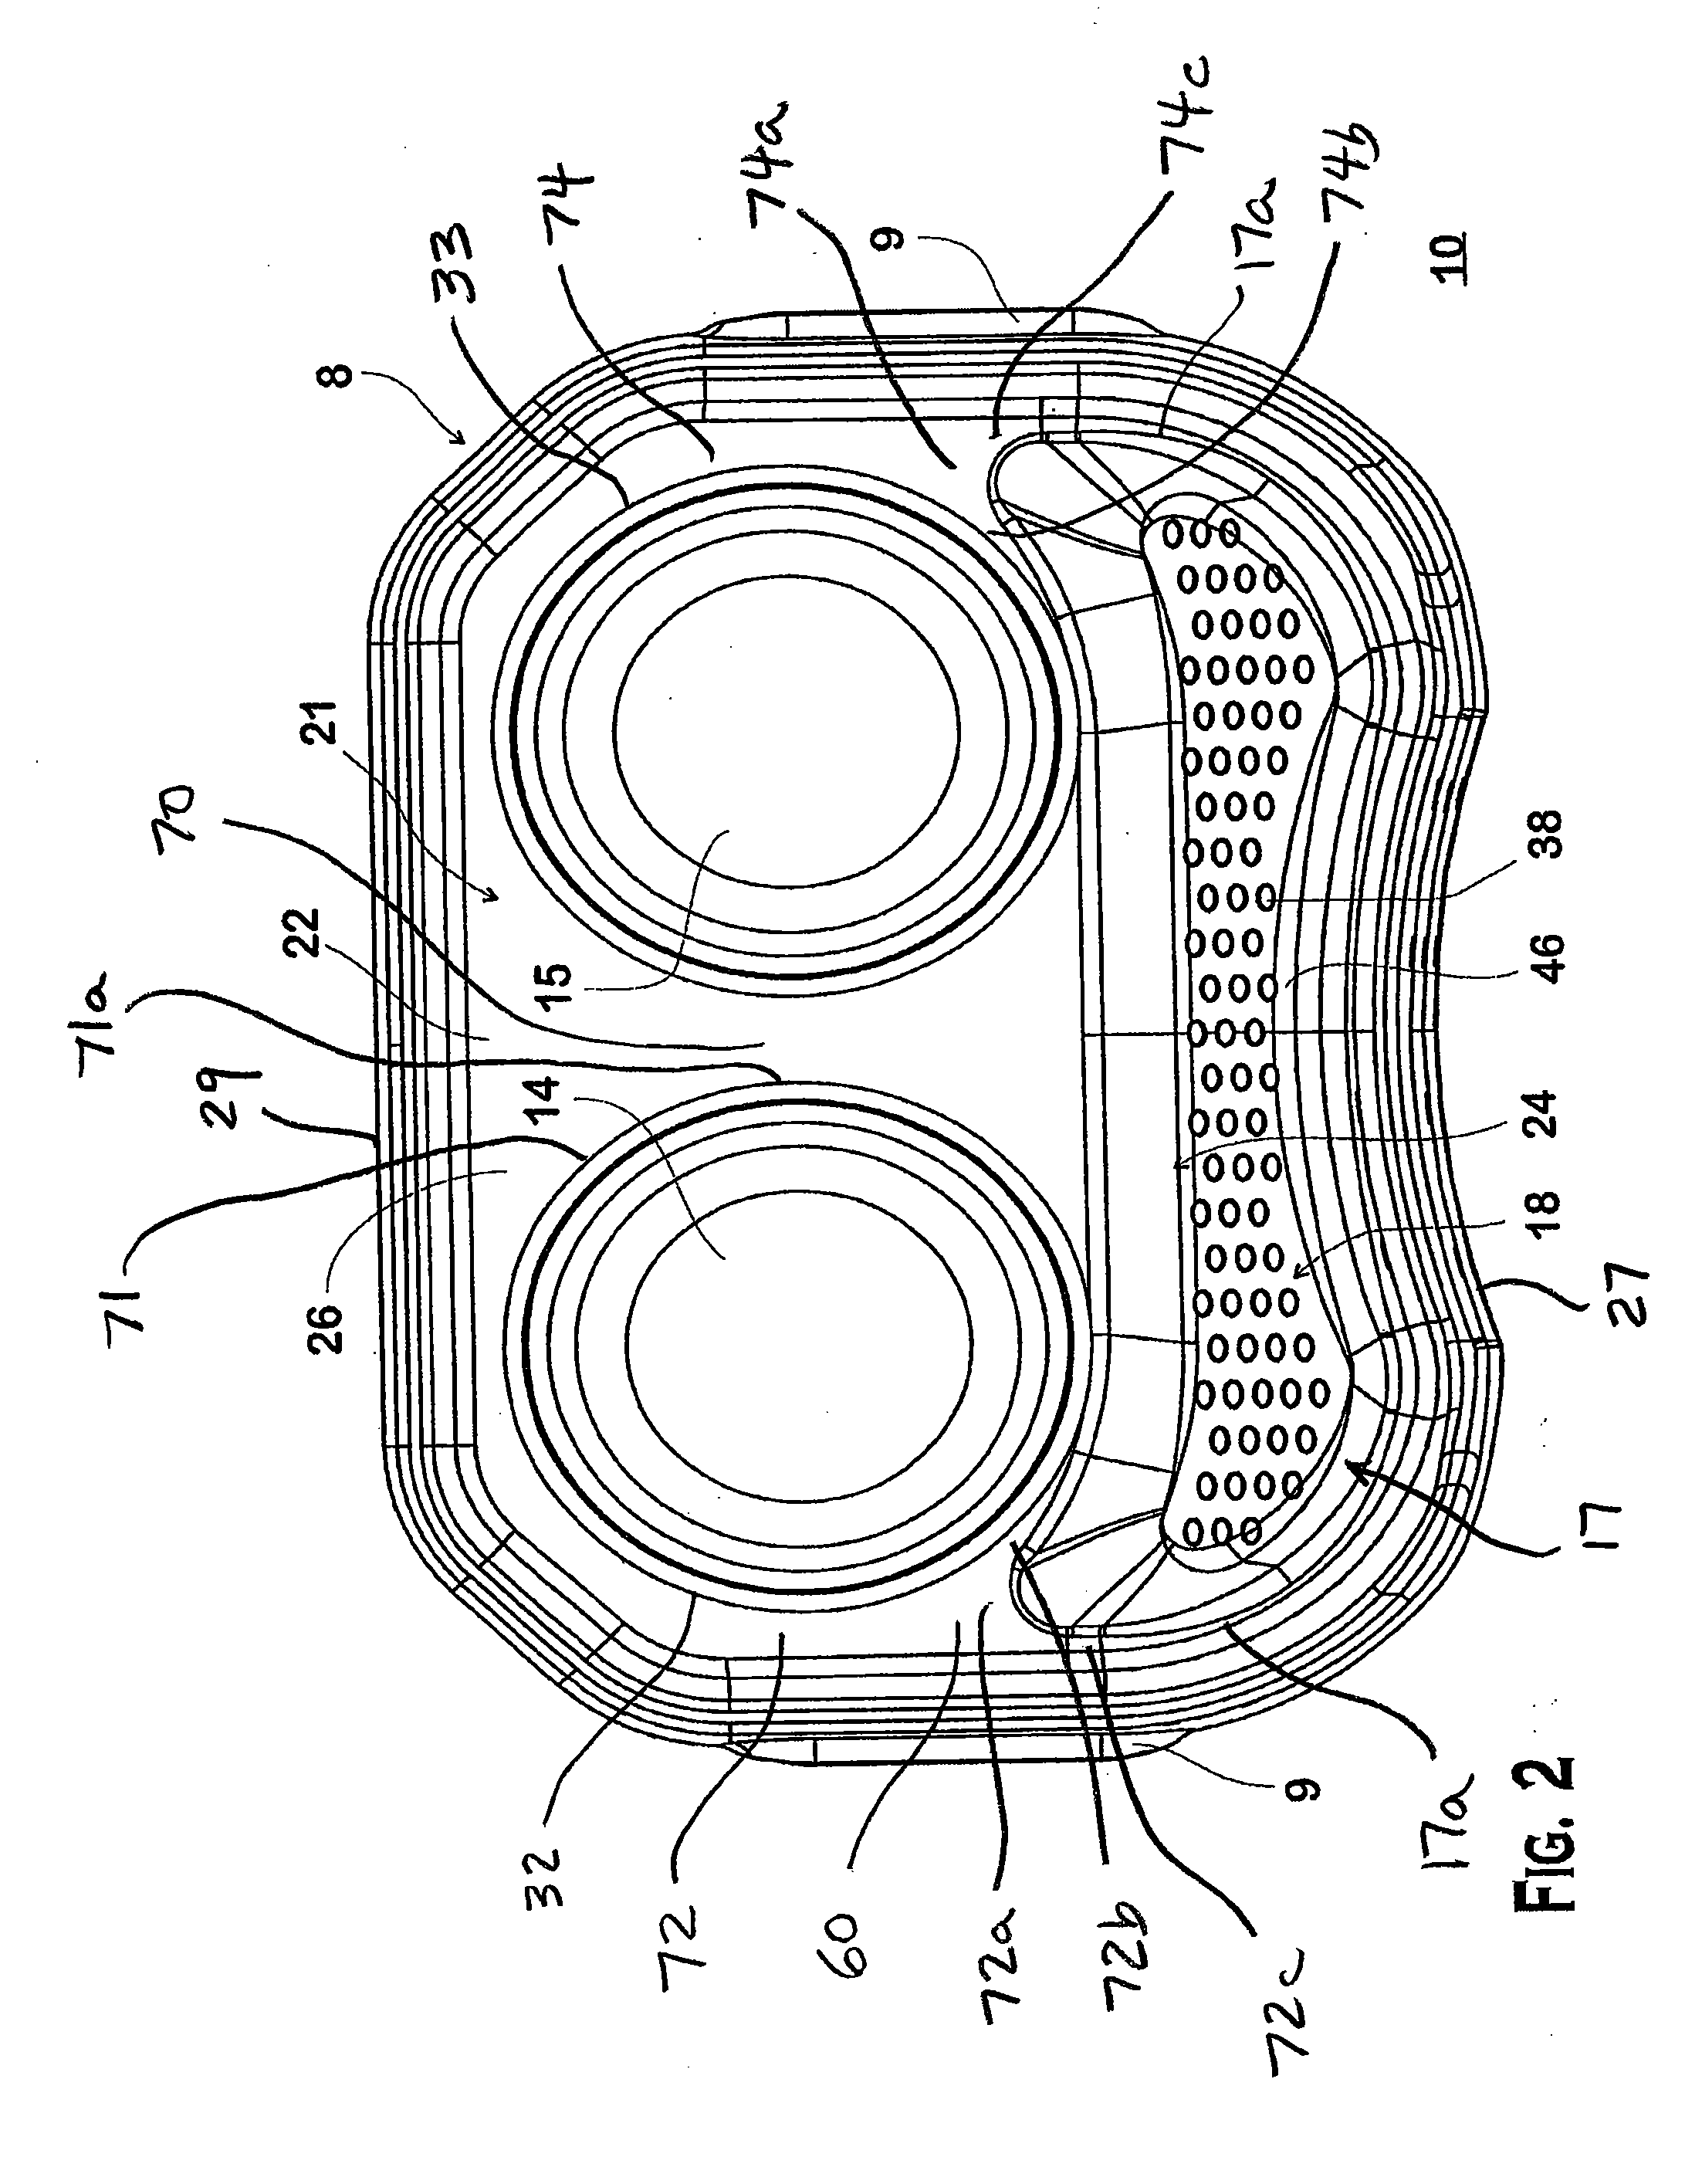 Pet feeding system and method for collecting spilled food and water